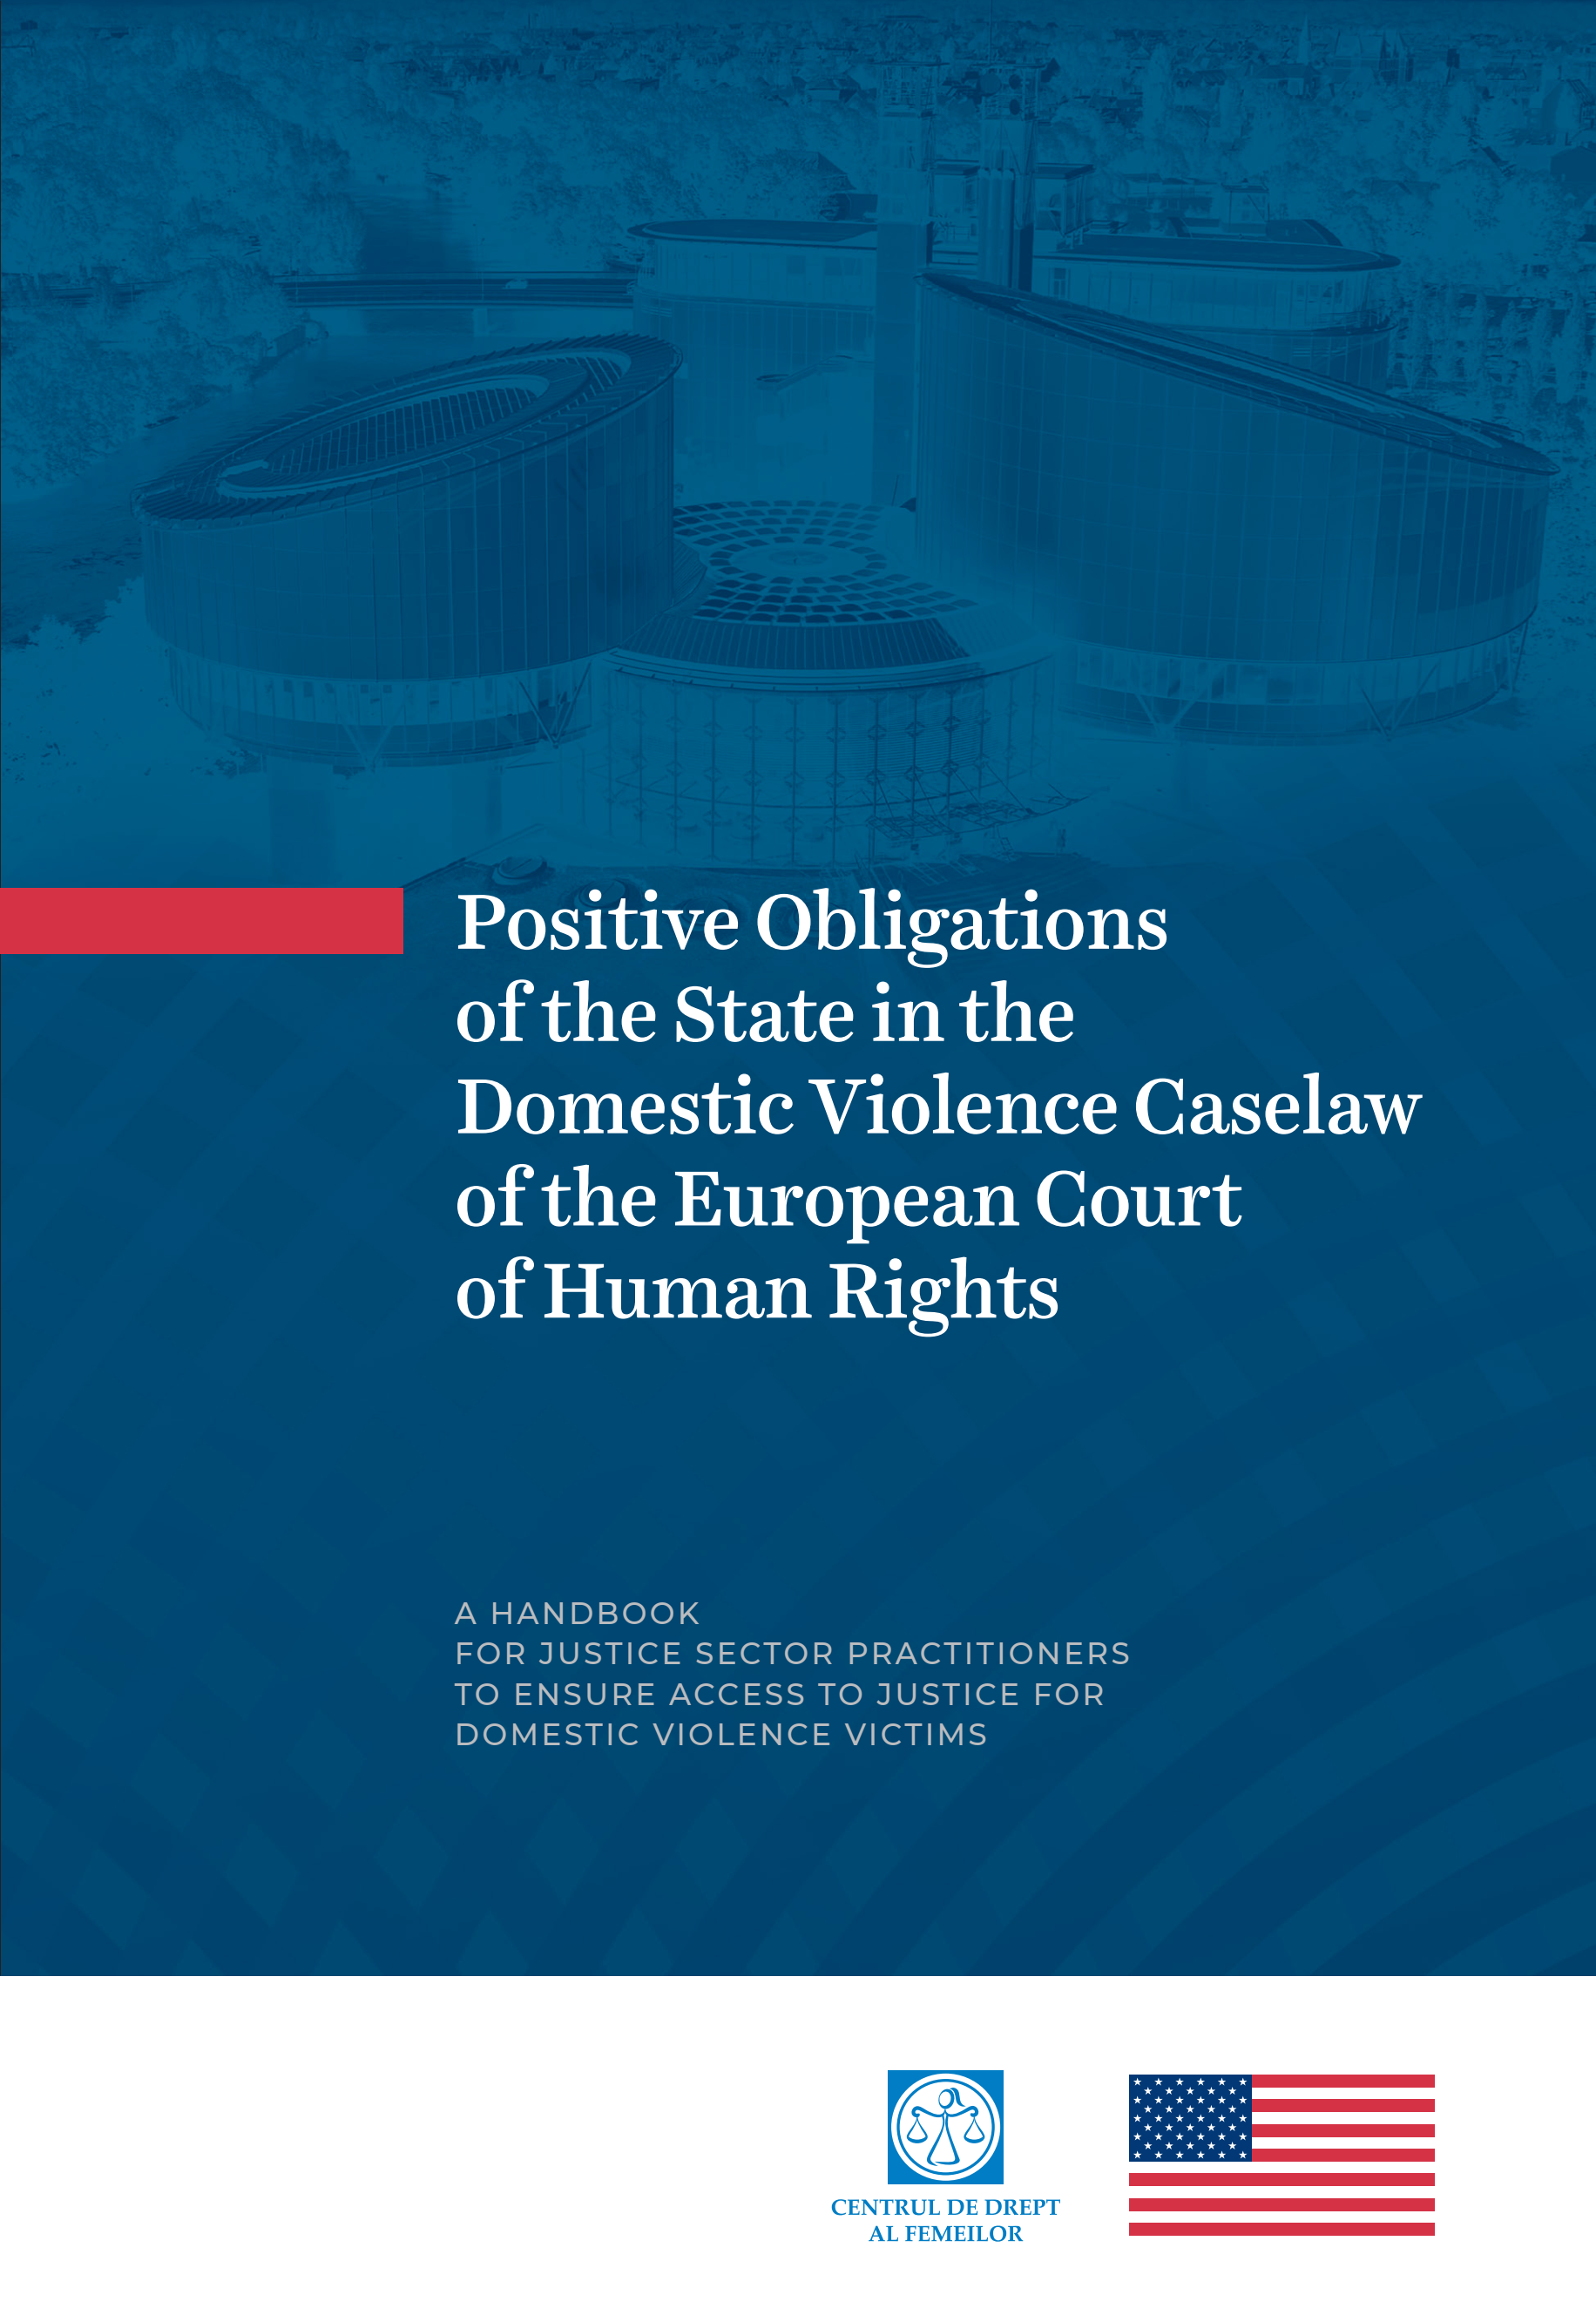 Positive Obligations of the State in the Domestic Violence Caselaw of the European Court of Human Rights